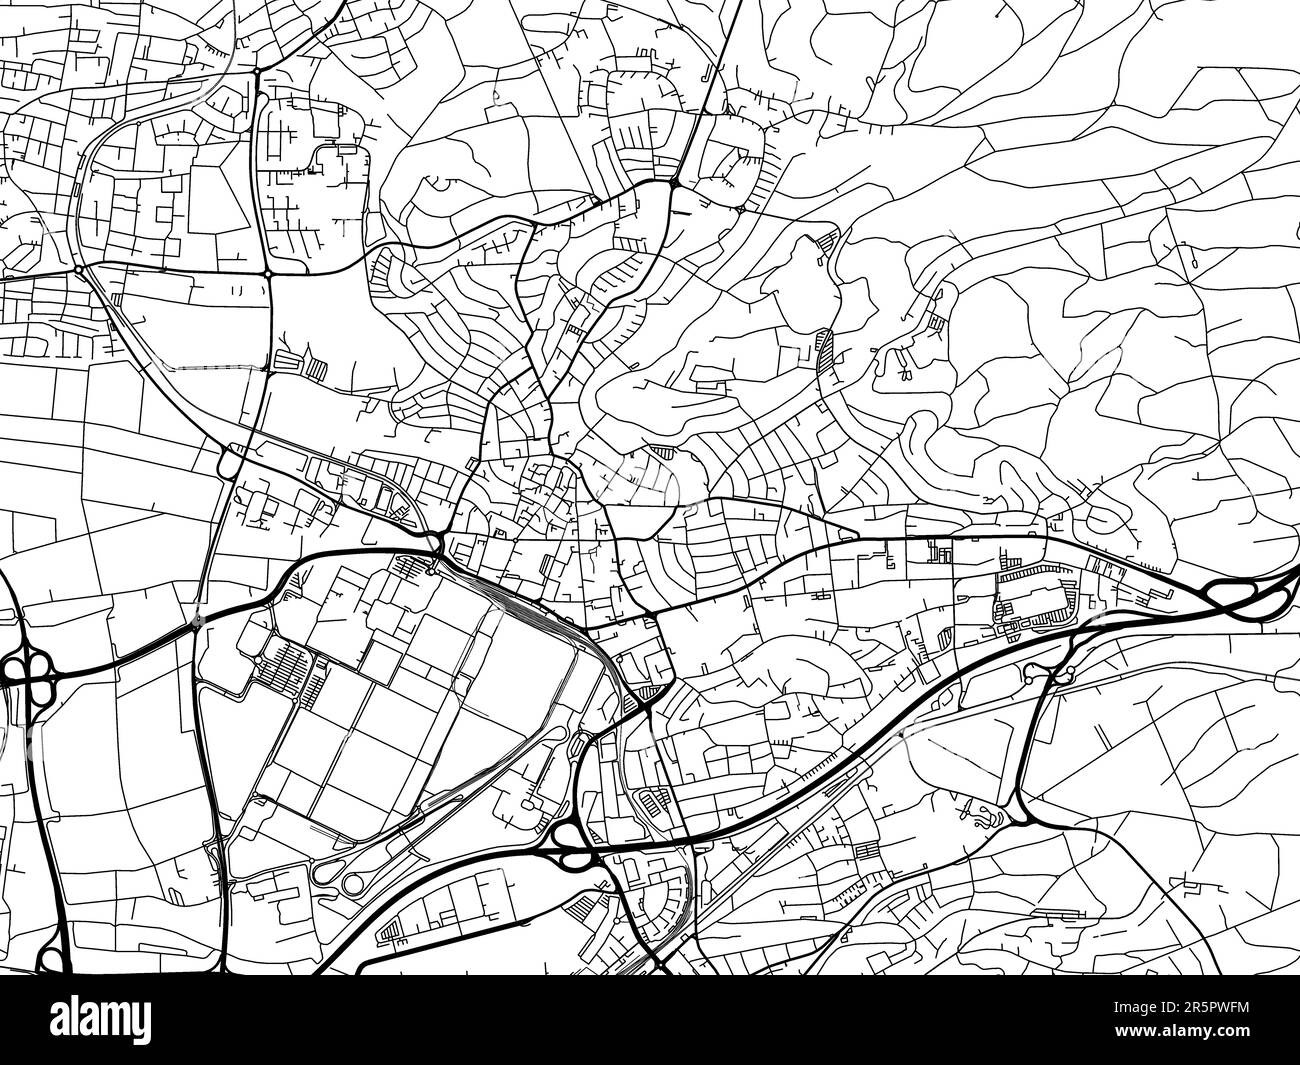 Vector road map of the city of  Sindelfingen in Germany on a white background. Stock Photo